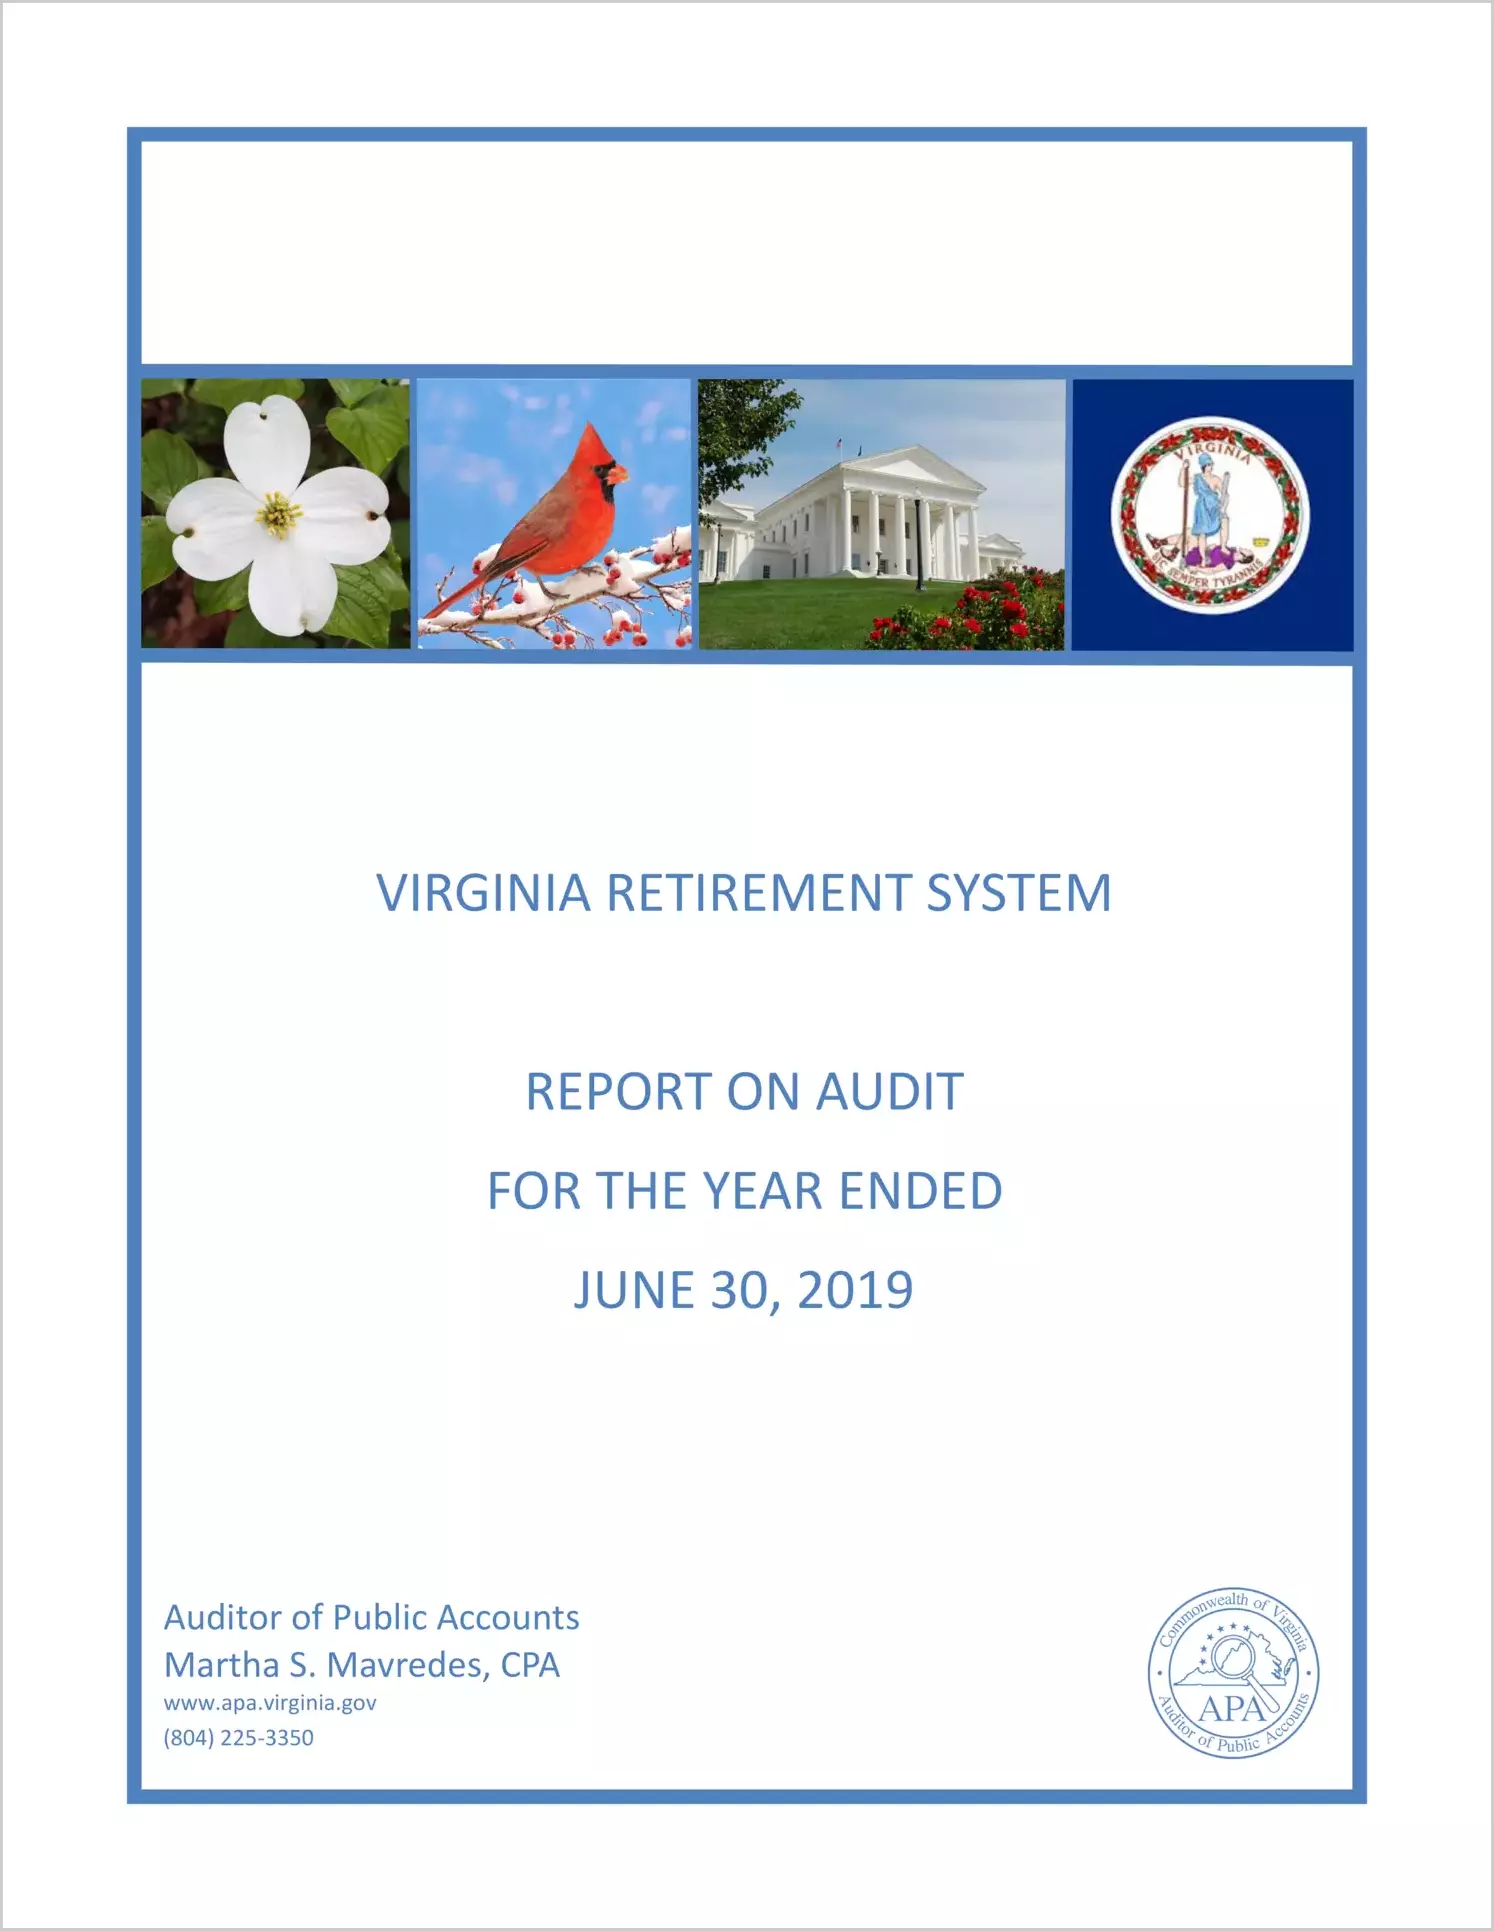 Virginia Retirement System for the year ended June 30, 2019